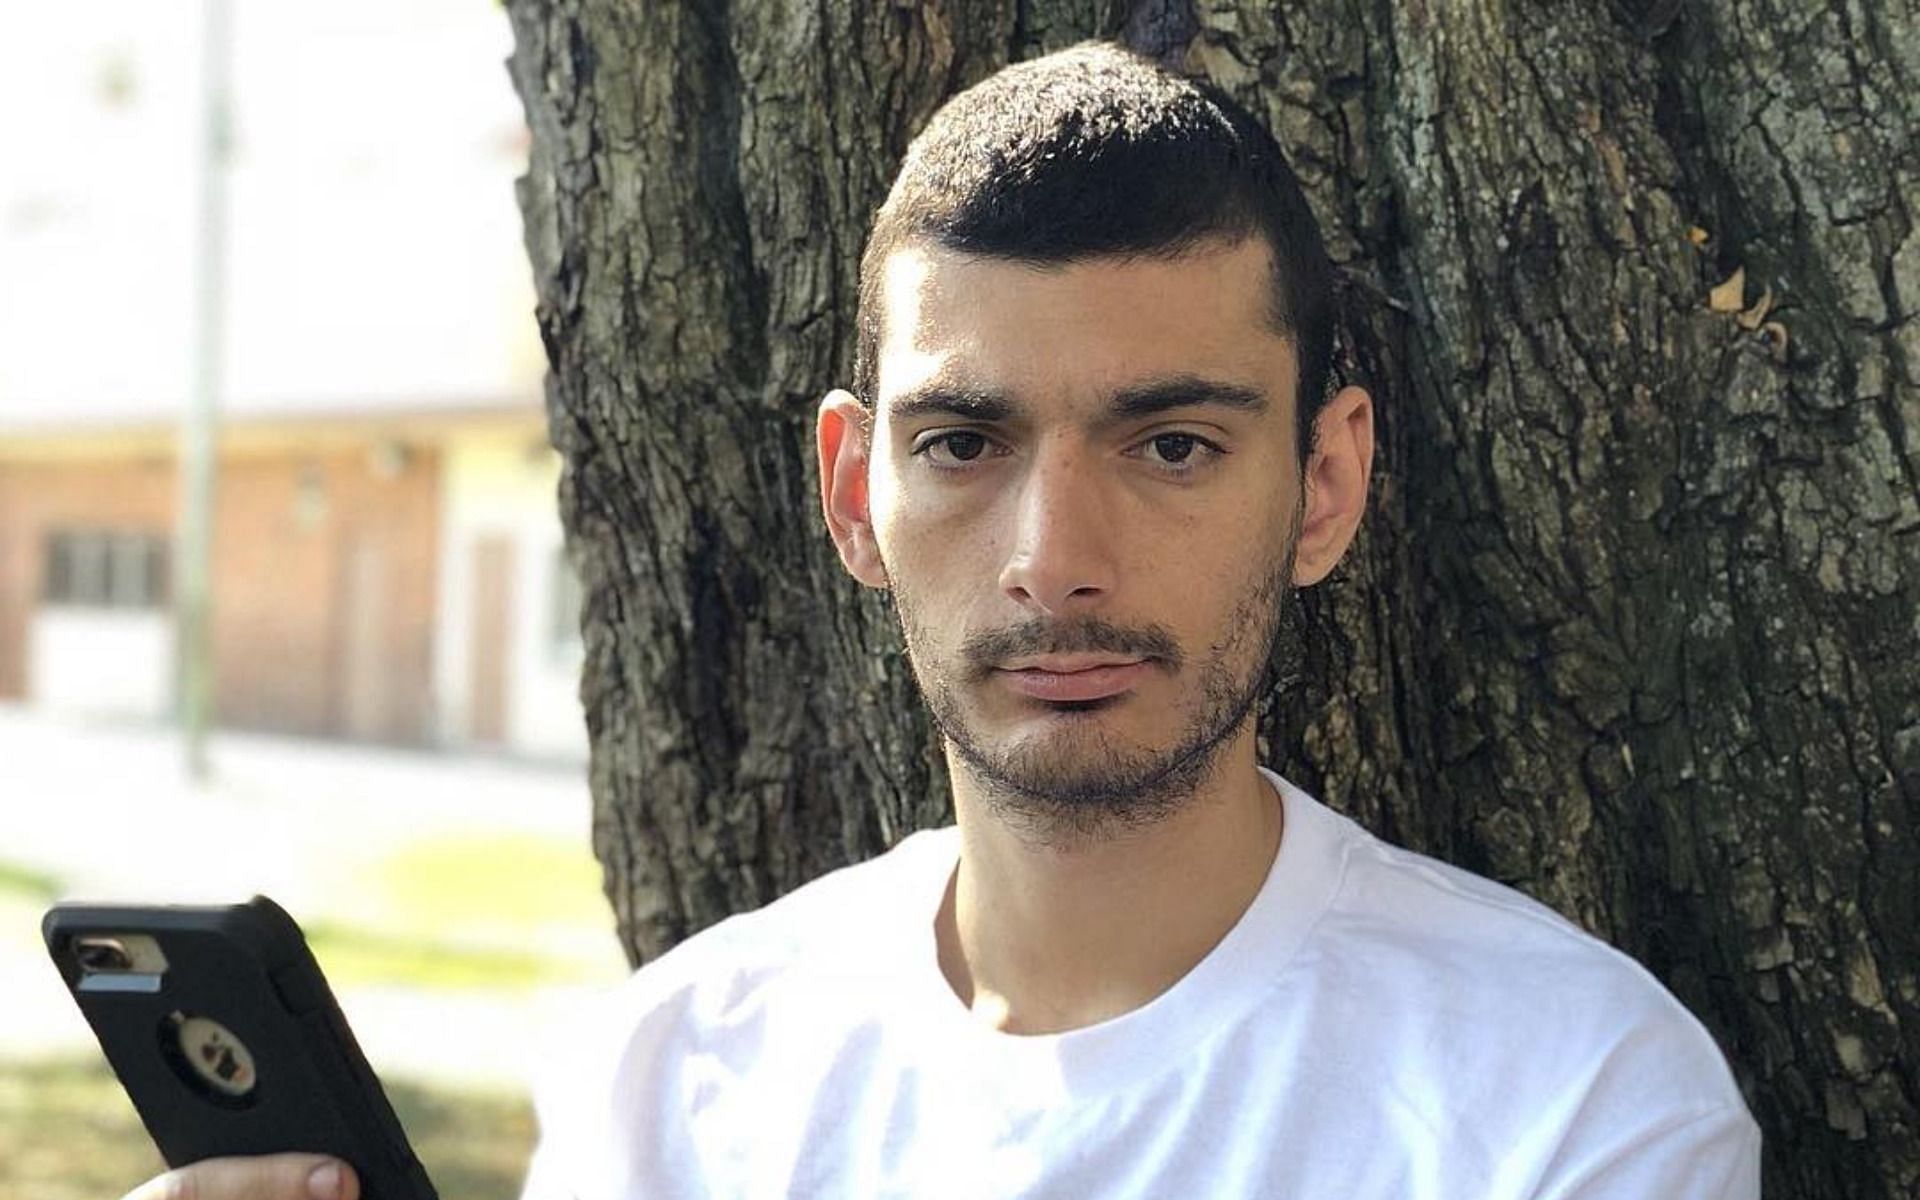 Ice Poseidon breaks silence after being accused of $500,000 crypto scam